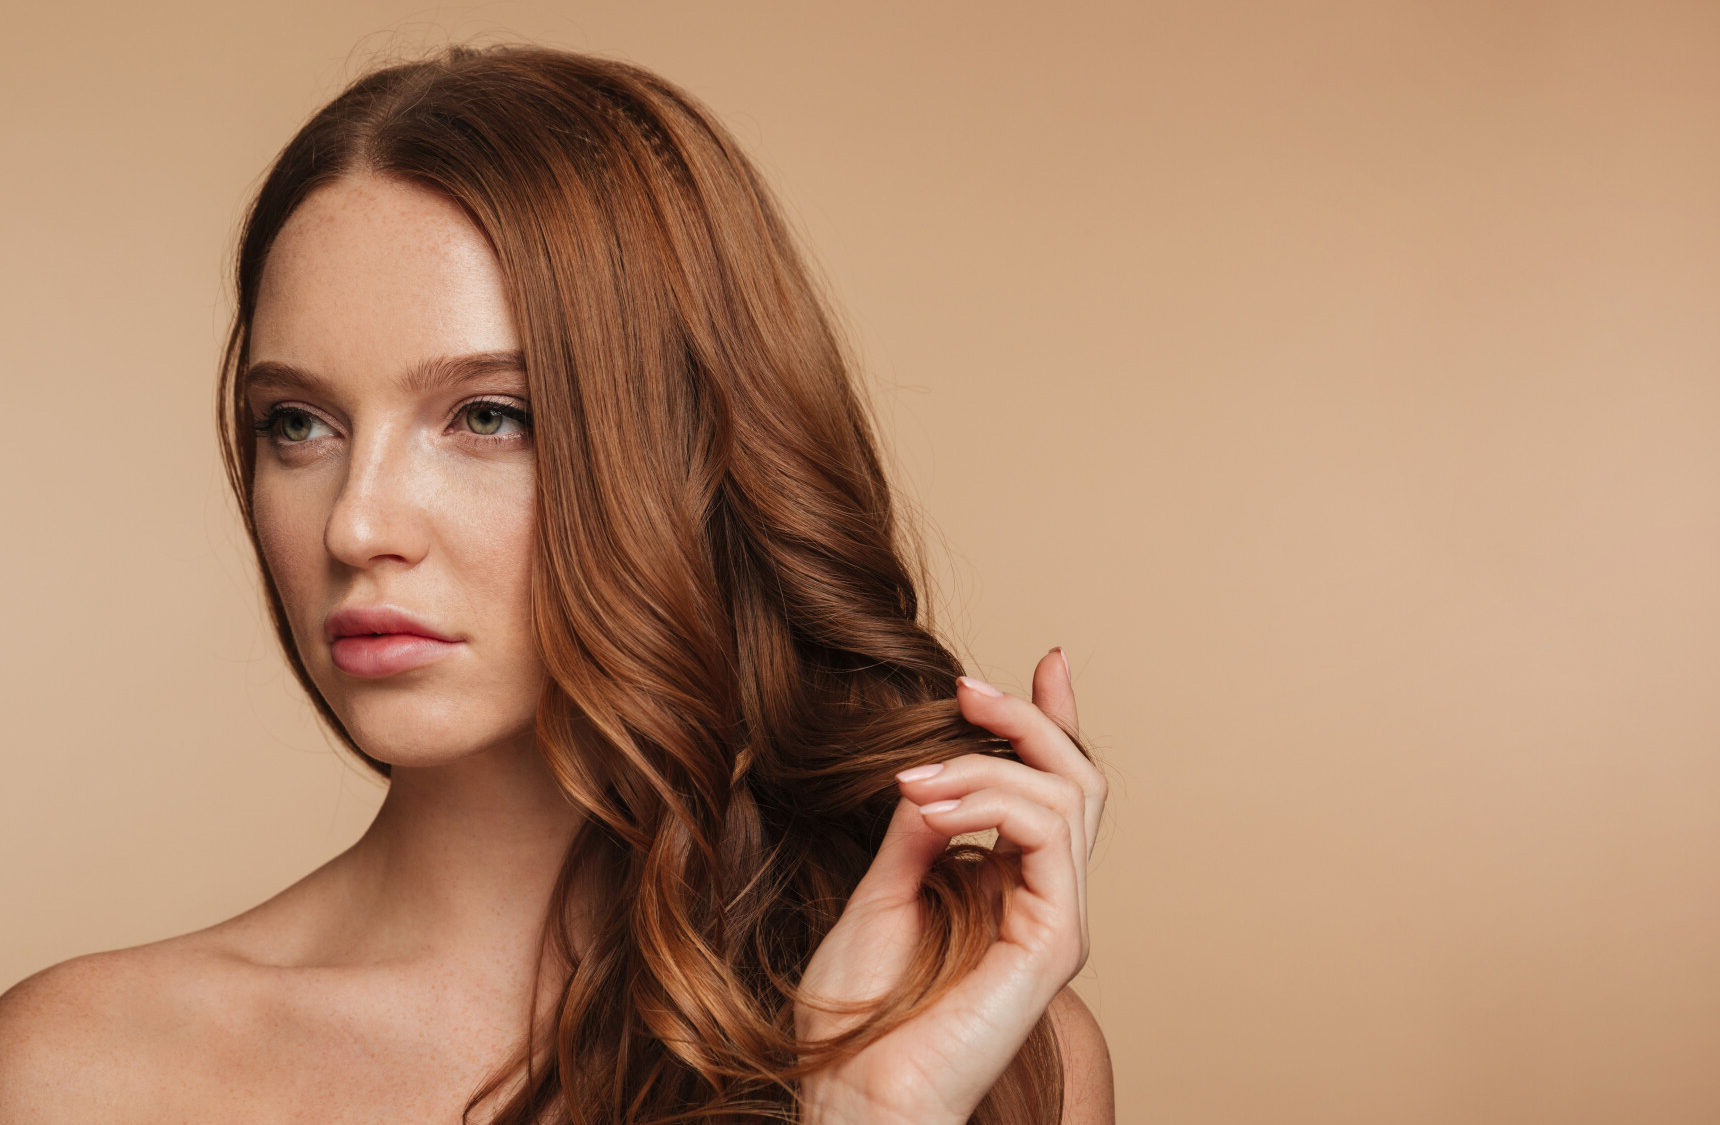 Platelet-rich plasma (PRP) injections for hair loss